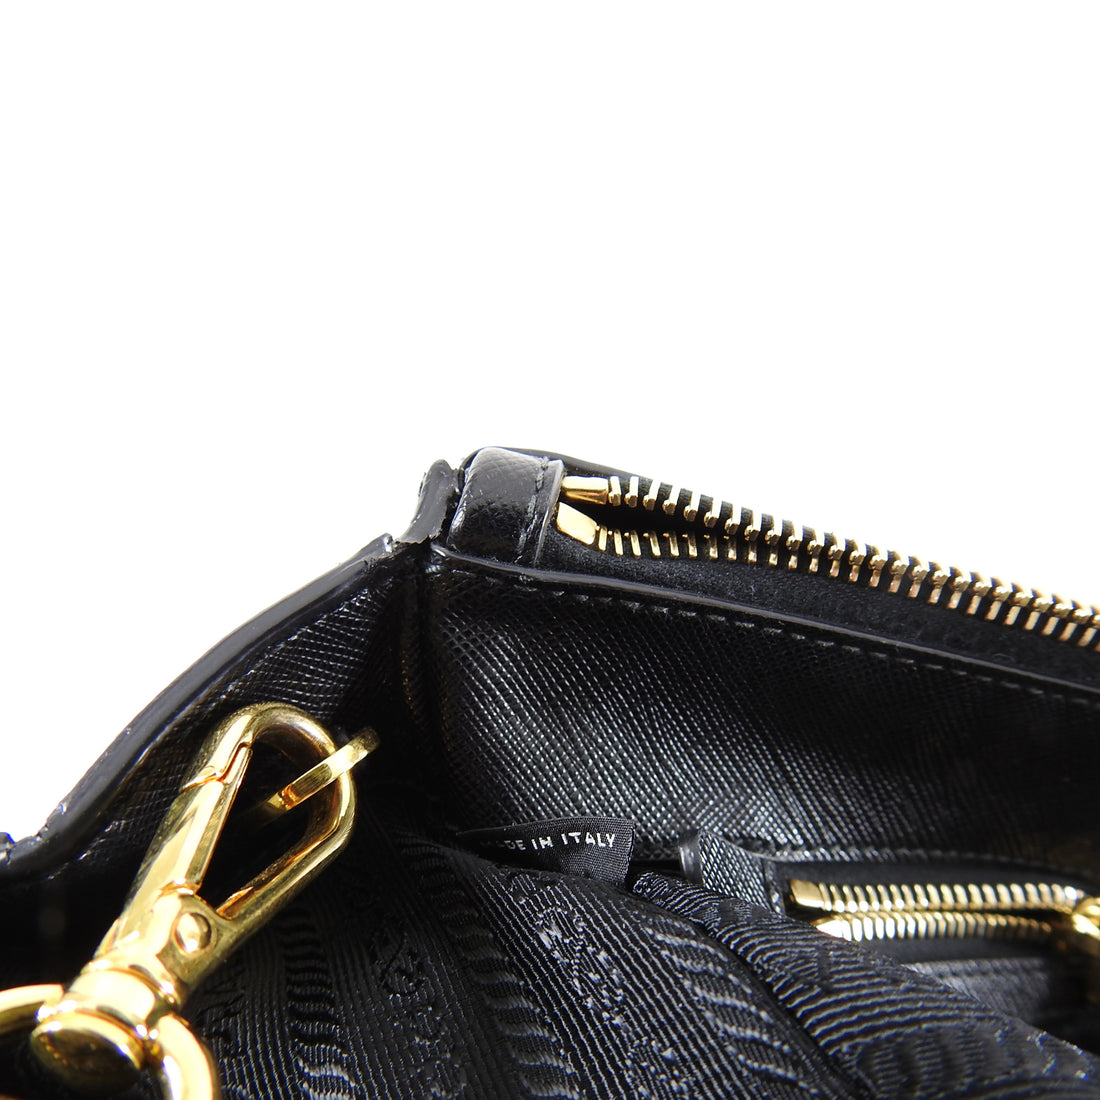 Shop authentic Prada Saffiano Lux Double Zip Small at revogue for